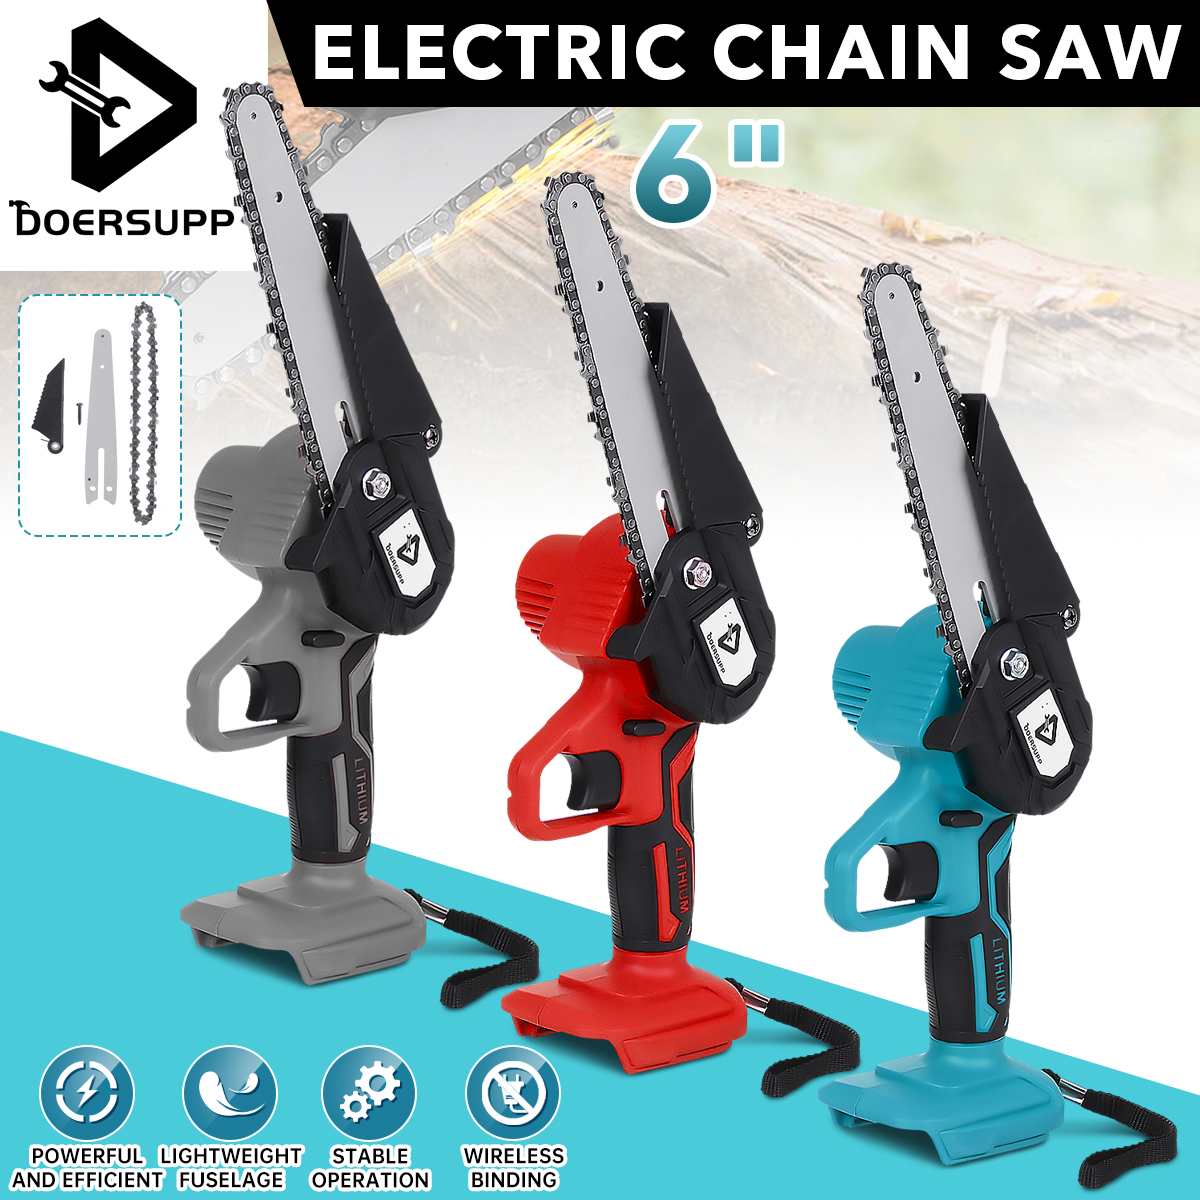 Doersupp-6-Inch-Cordless-Electric-Chain-Saw-Chainsaw-3000W-Mini-Woodworking-Wood-Cutter-One-Hand-Saw-1847597-2